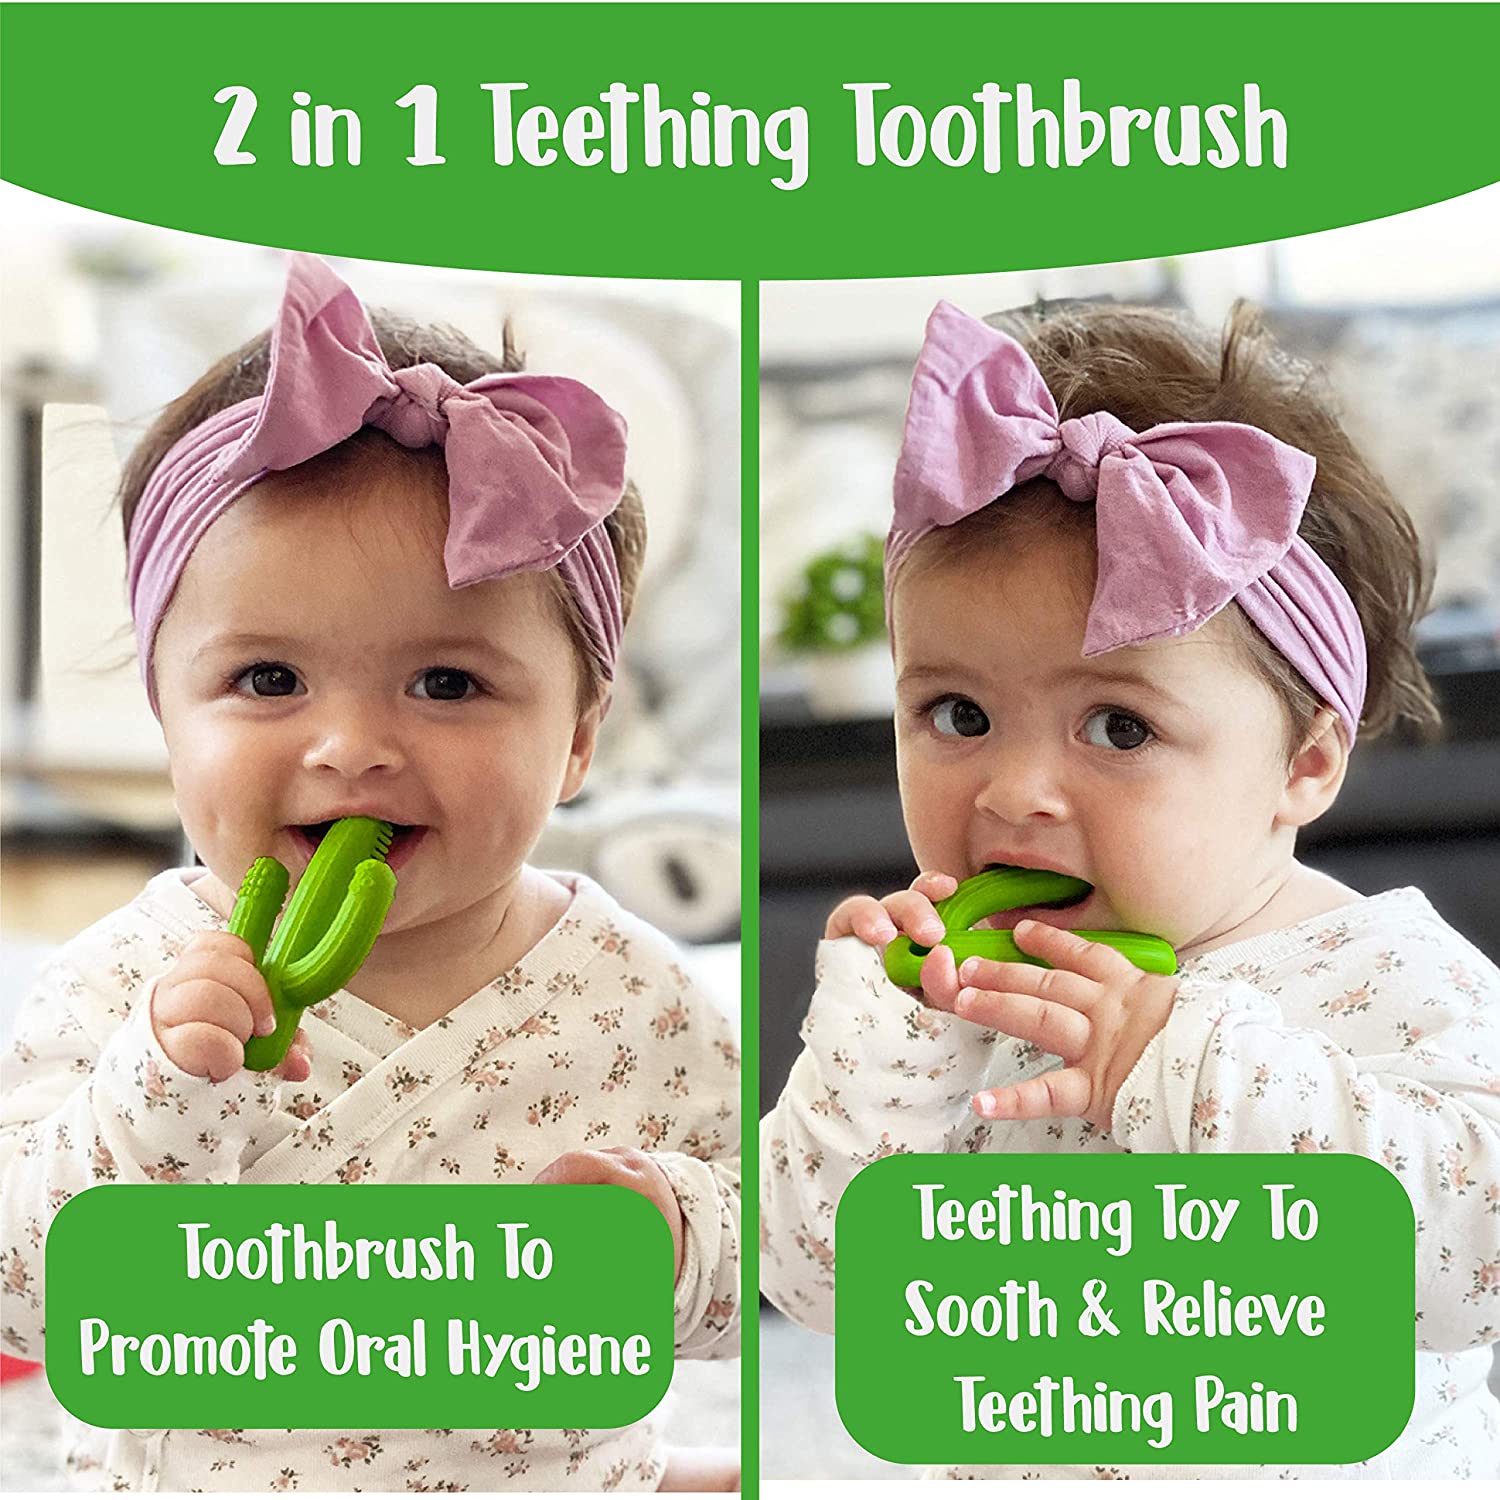 Cactus Baby Teething Toys for Newborn Infants and Toddlers - Self-Soothing Pain Relief Soft Silicone Teether and Training Toothbrush for Babies, BPA Free, Soothes Babies Sore Gums